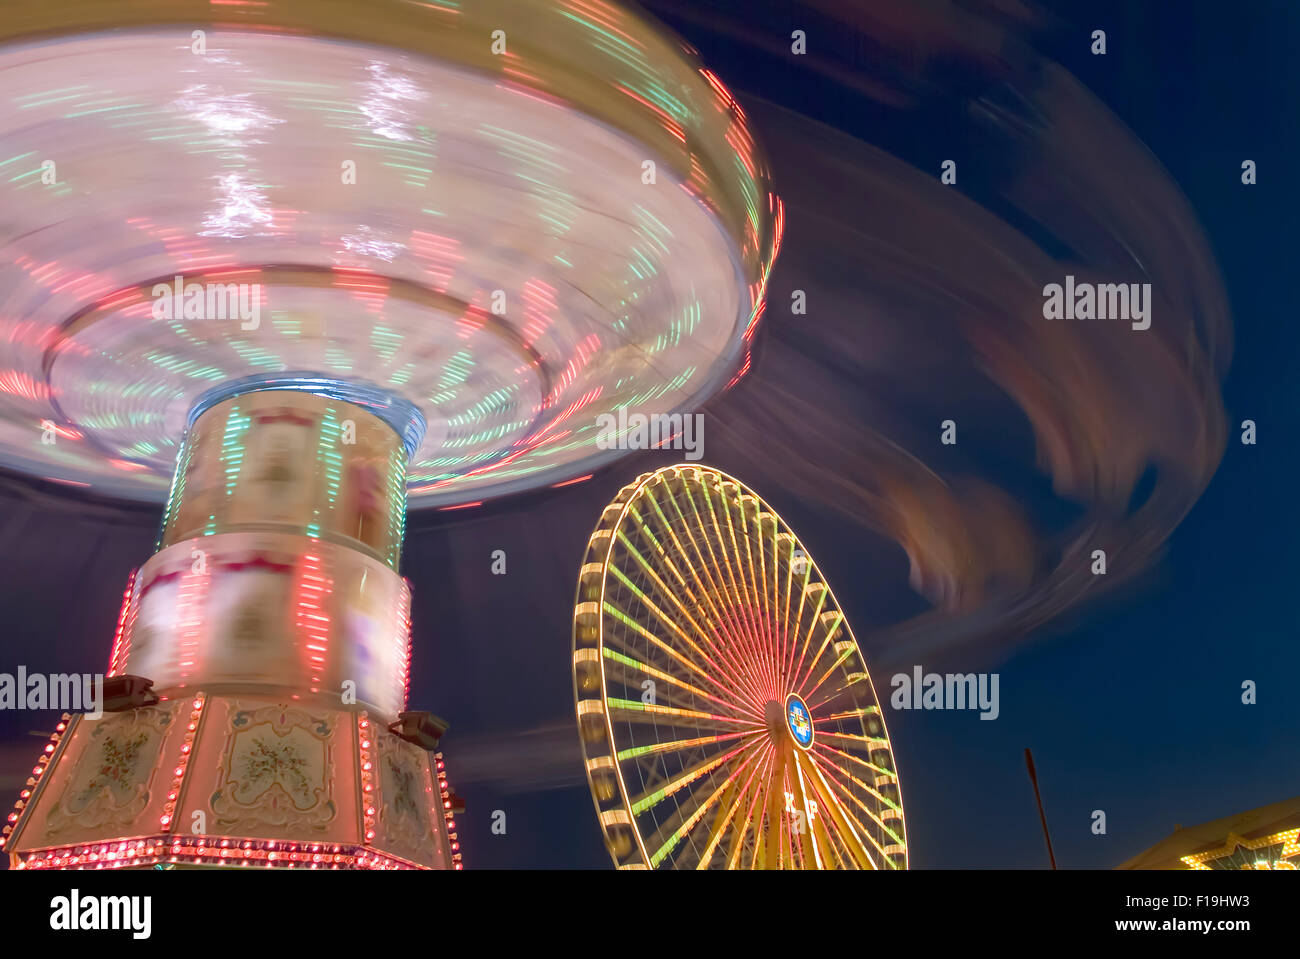 Funfair with giant wheel and merry go round in motion evening light germany europe Stock Photo